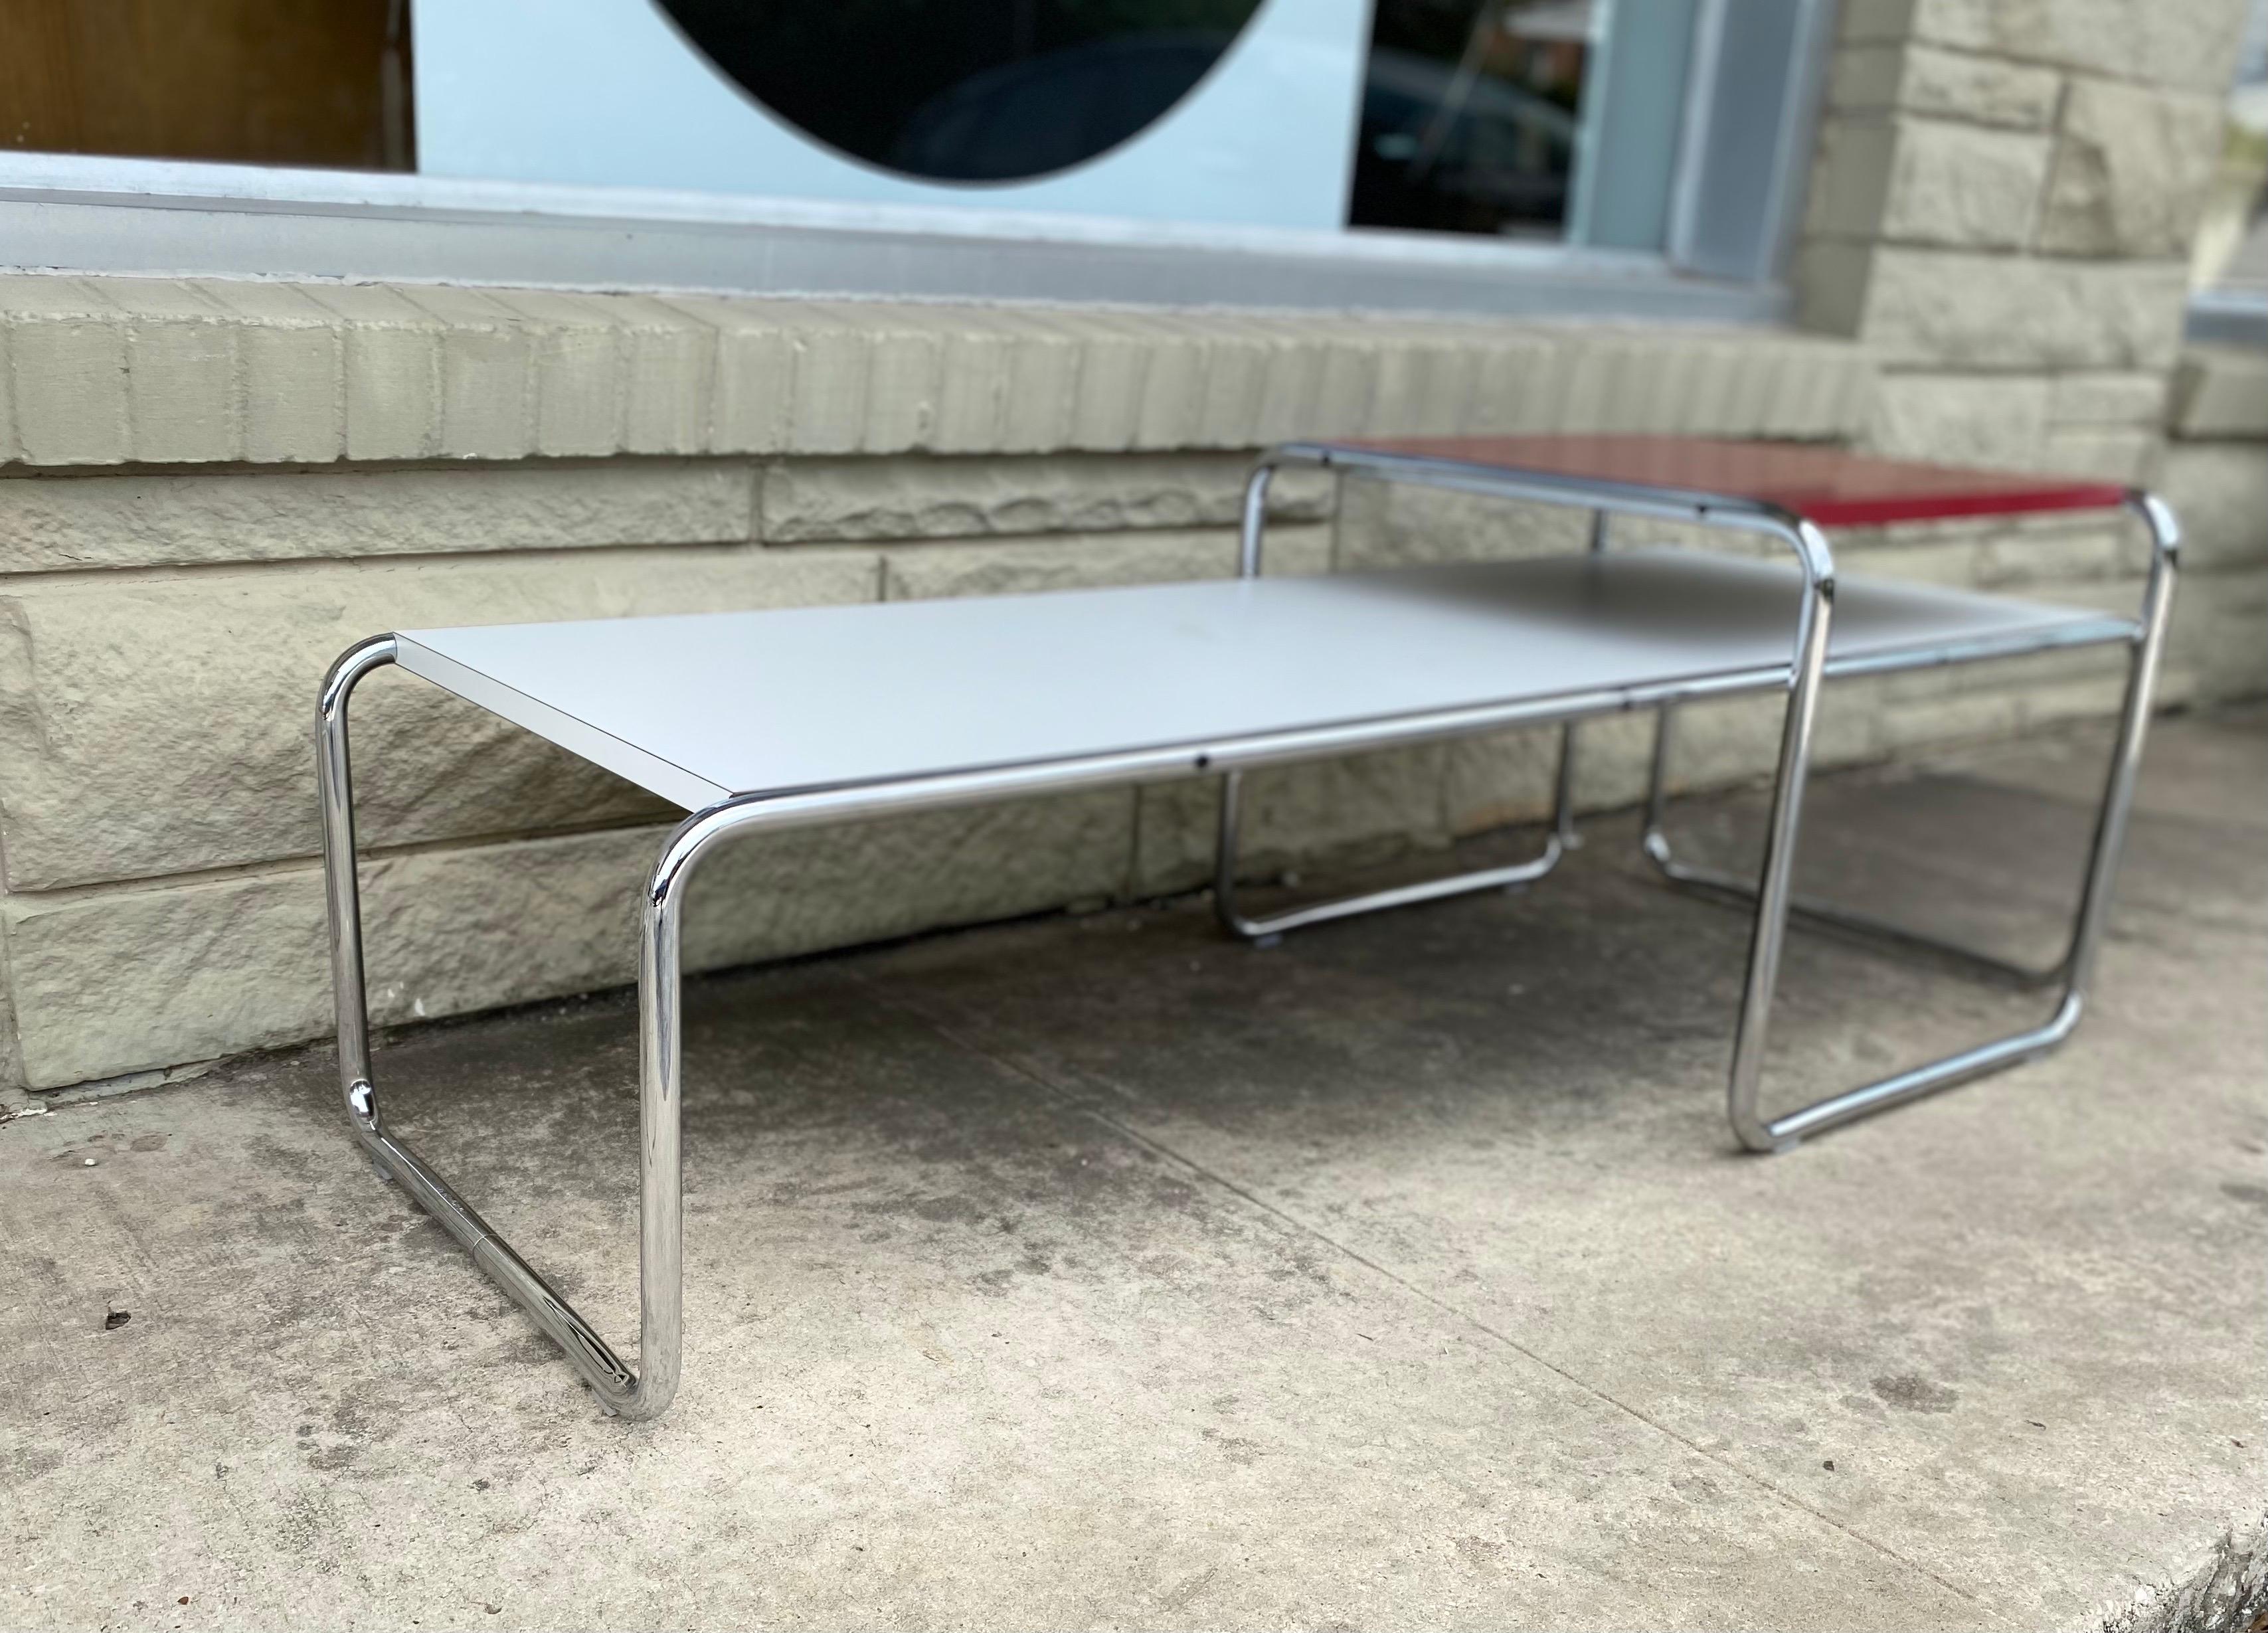 Mid-Century Modern Laccio coffee and side table designed by Marcel Breuer is functional and a unique piece for any space. Made of tubular steel and laminate top in satin finish, this coffee table and side table set is in good condition. 

side